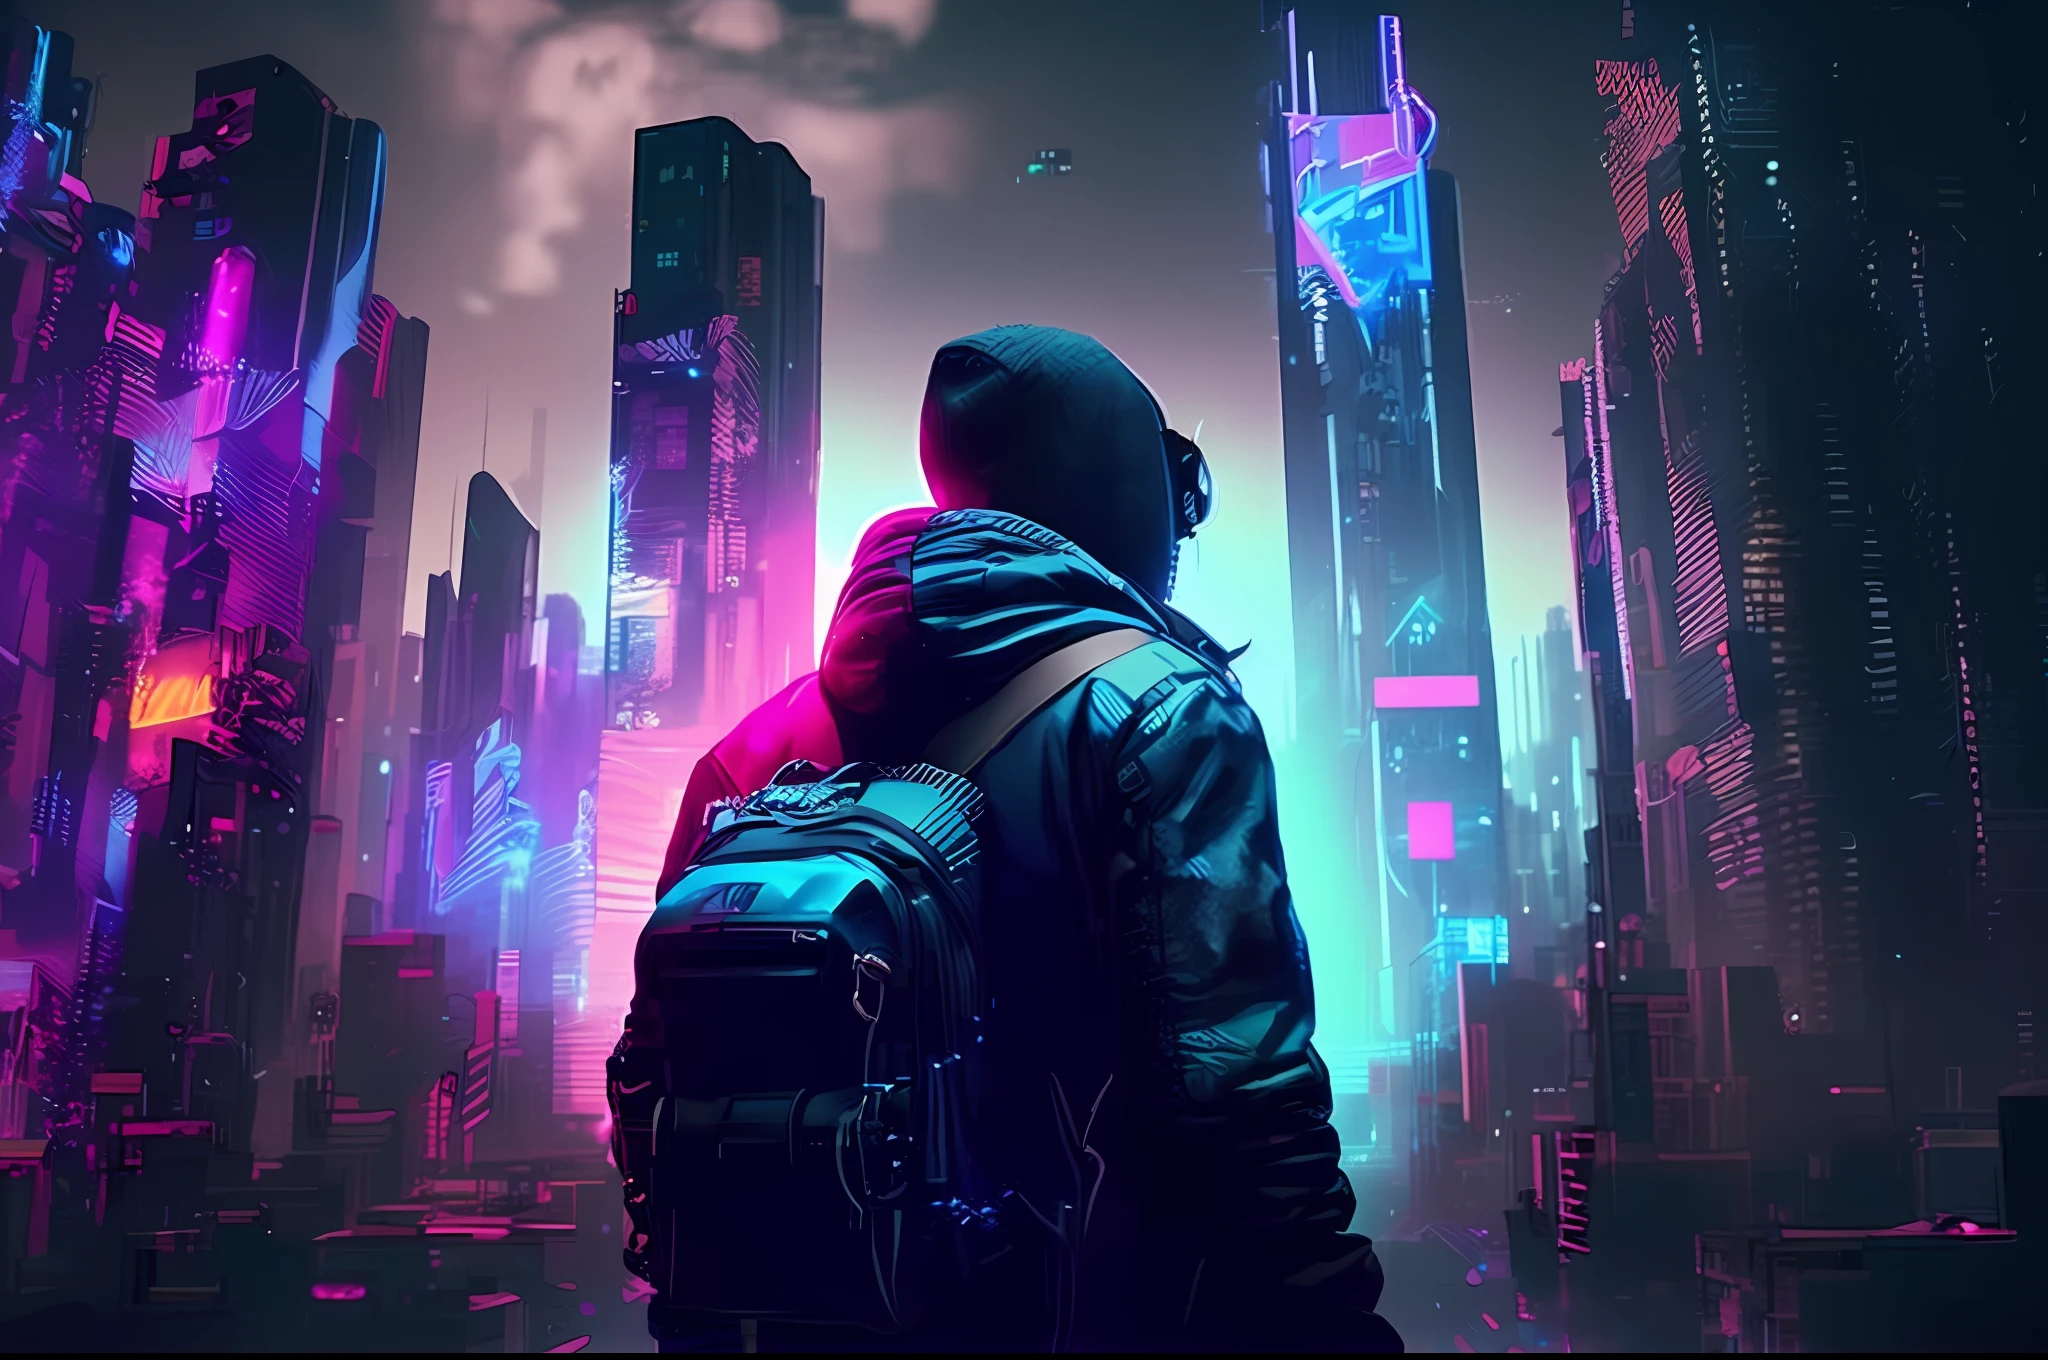 a man in a backpack standing in front of a city with neon lights, in cyberpunk city, cyberpunk vibe, cyberpunk in a cyberpunk city, has cyberpunk style, more and more cyberpunk, in cyberpunk aesthetic, beeple!!, style hybrid mix of beeple, cyberpunk aesthetics, aesthetic cyberpunk, beeple style, cyberpunk vibrant colors, cyberpunk vibes